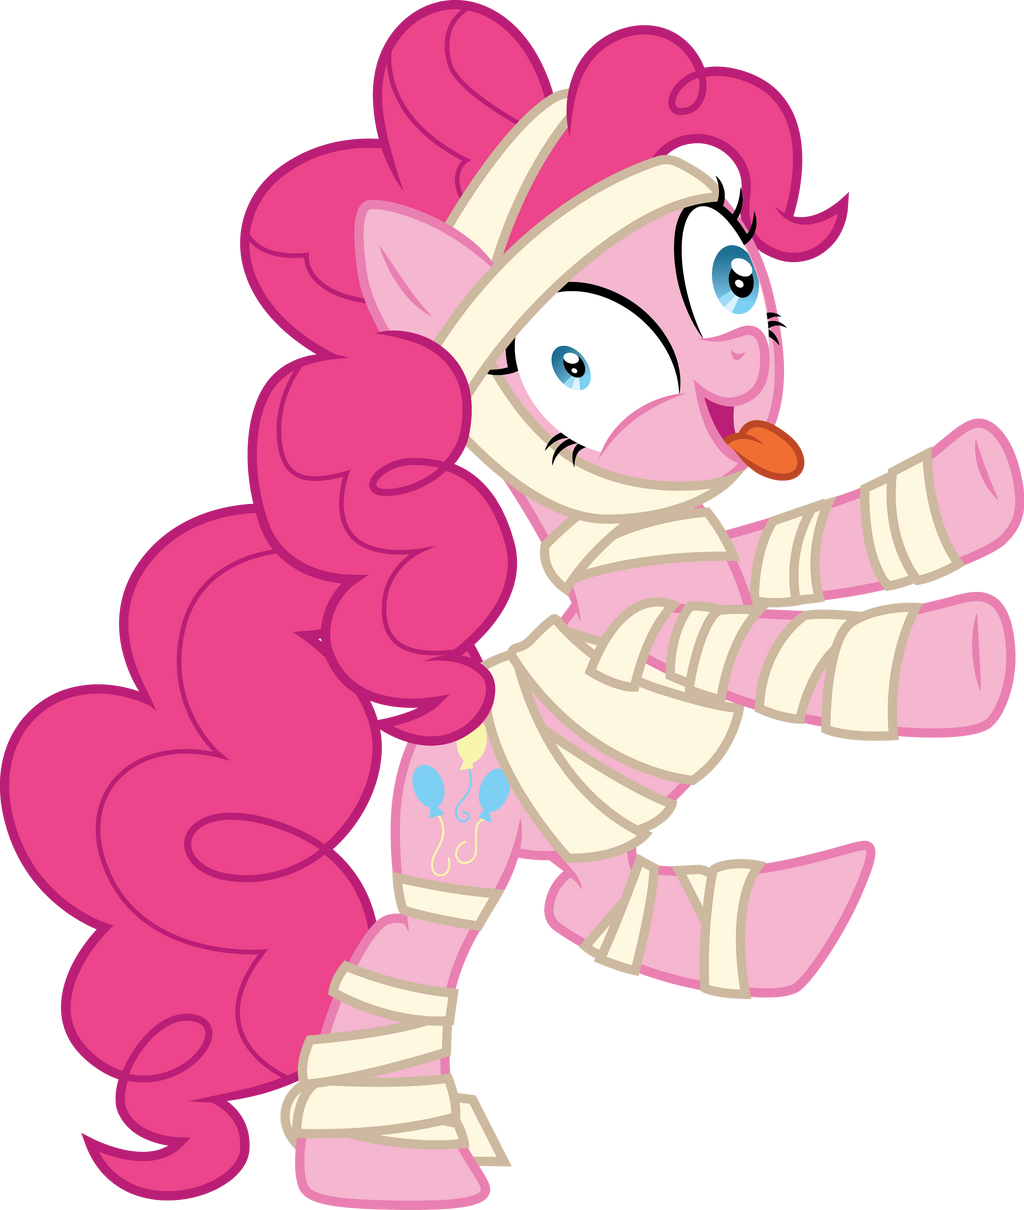 mummy_pinkie_pie_by_cloudyglow_dcot2di-fullview.png